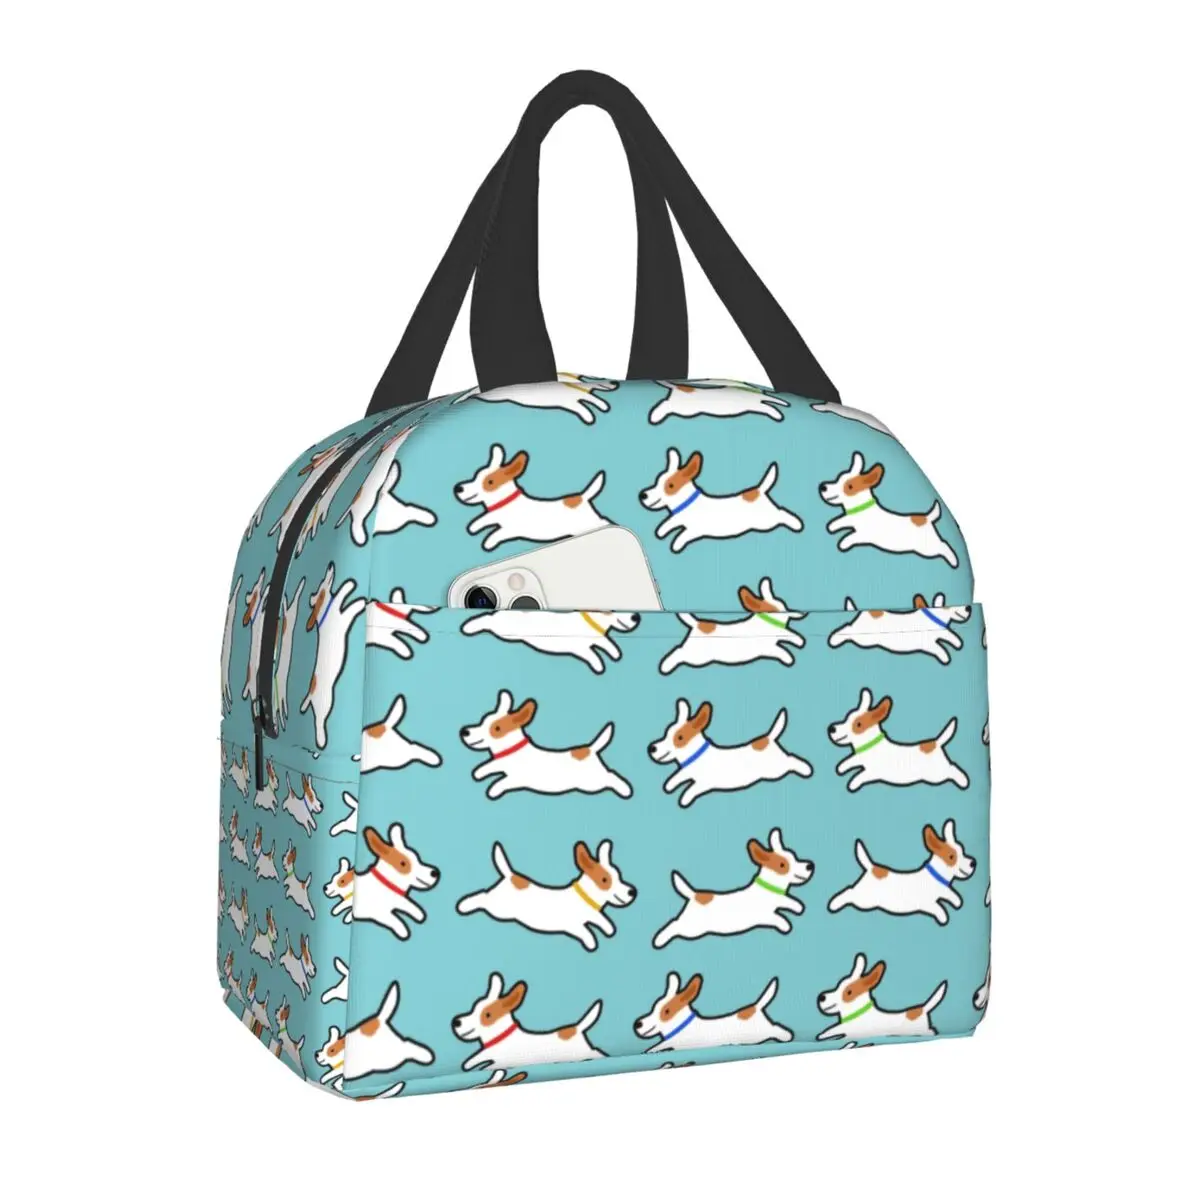 

Jack Russell Terrier Dog Insulated Lunch Bags for Camping Travel Portable Cooler Thermal Bento Box Kids Women Picnic Storage Bag